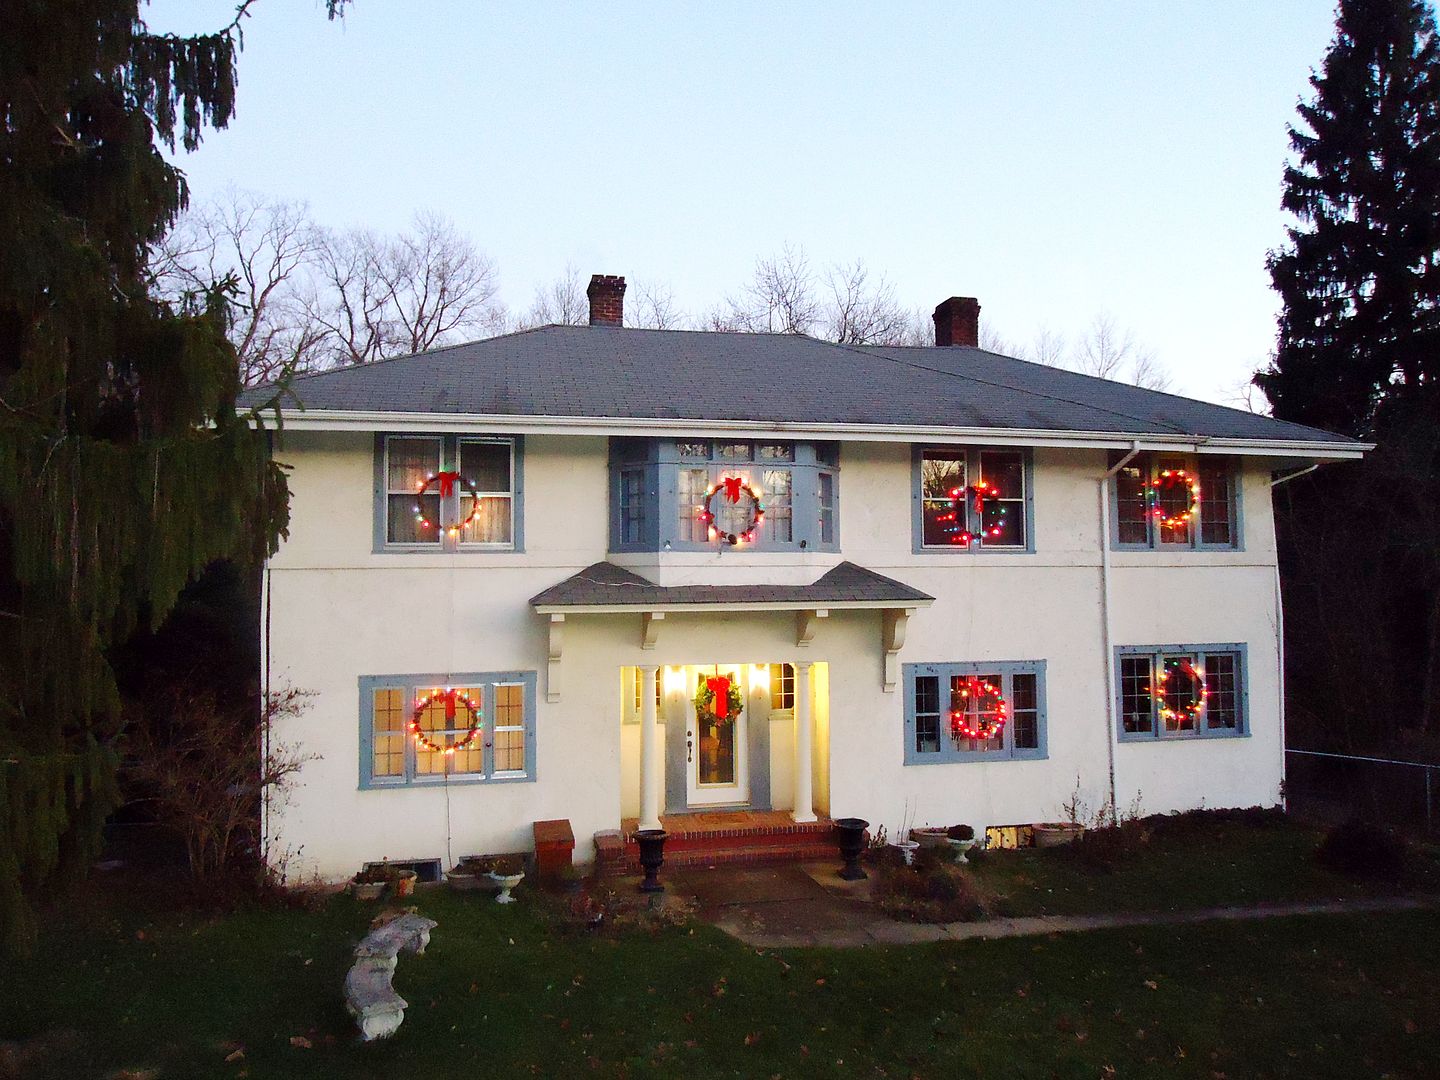 Ottos house dressed up for Christmas! Now this belongs on the cover of a Christmas card! So very pretty!  